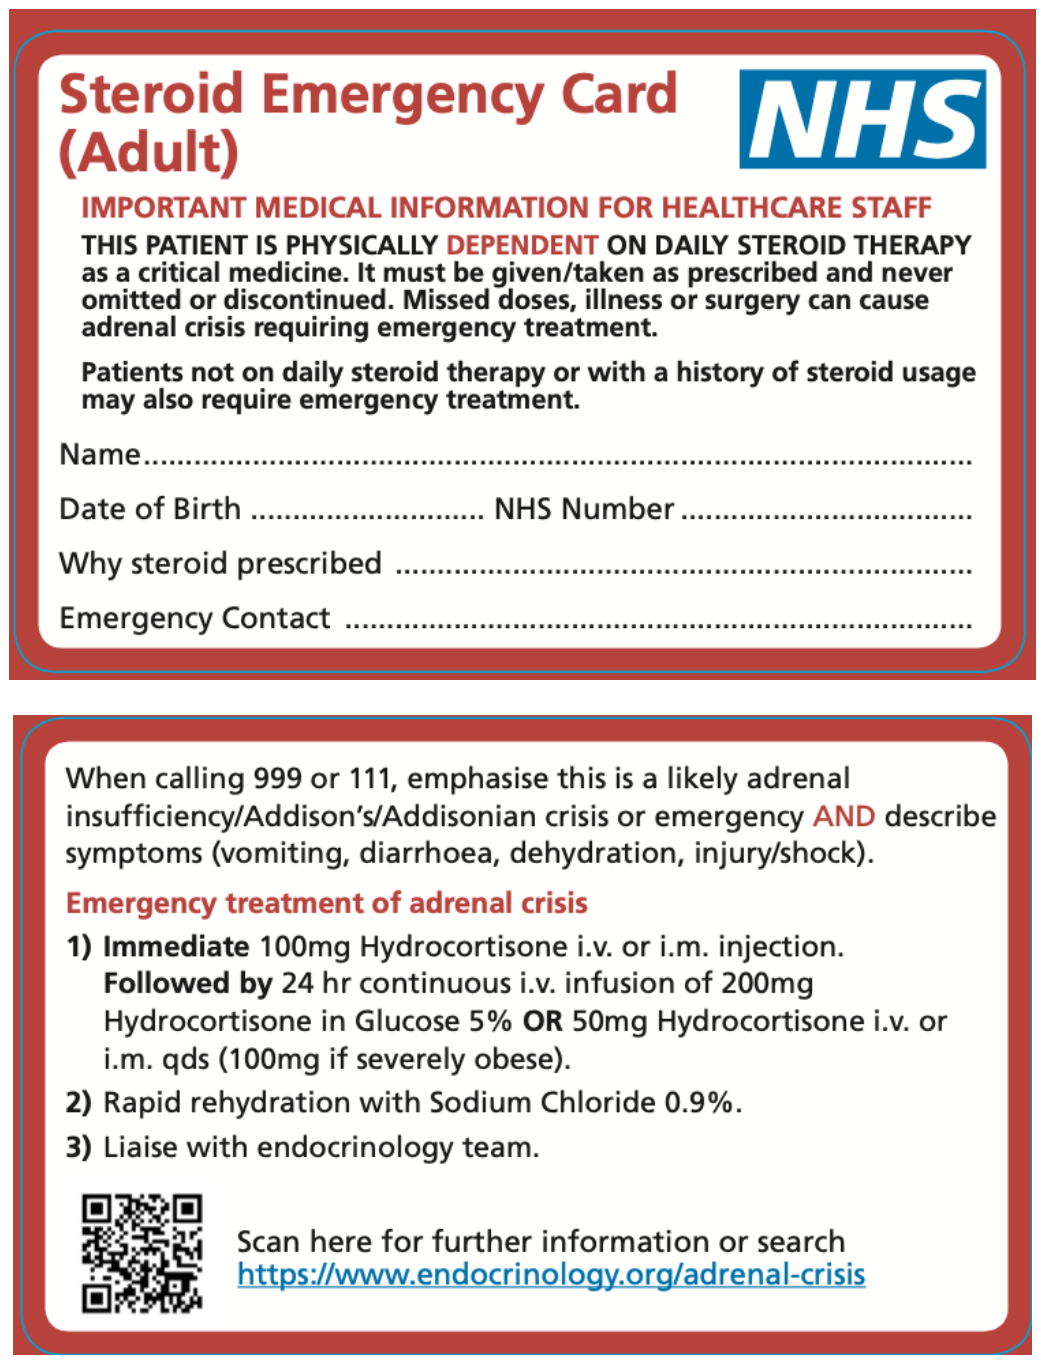 The NHS steroid emergency card for adults from the Society of Endocrinology